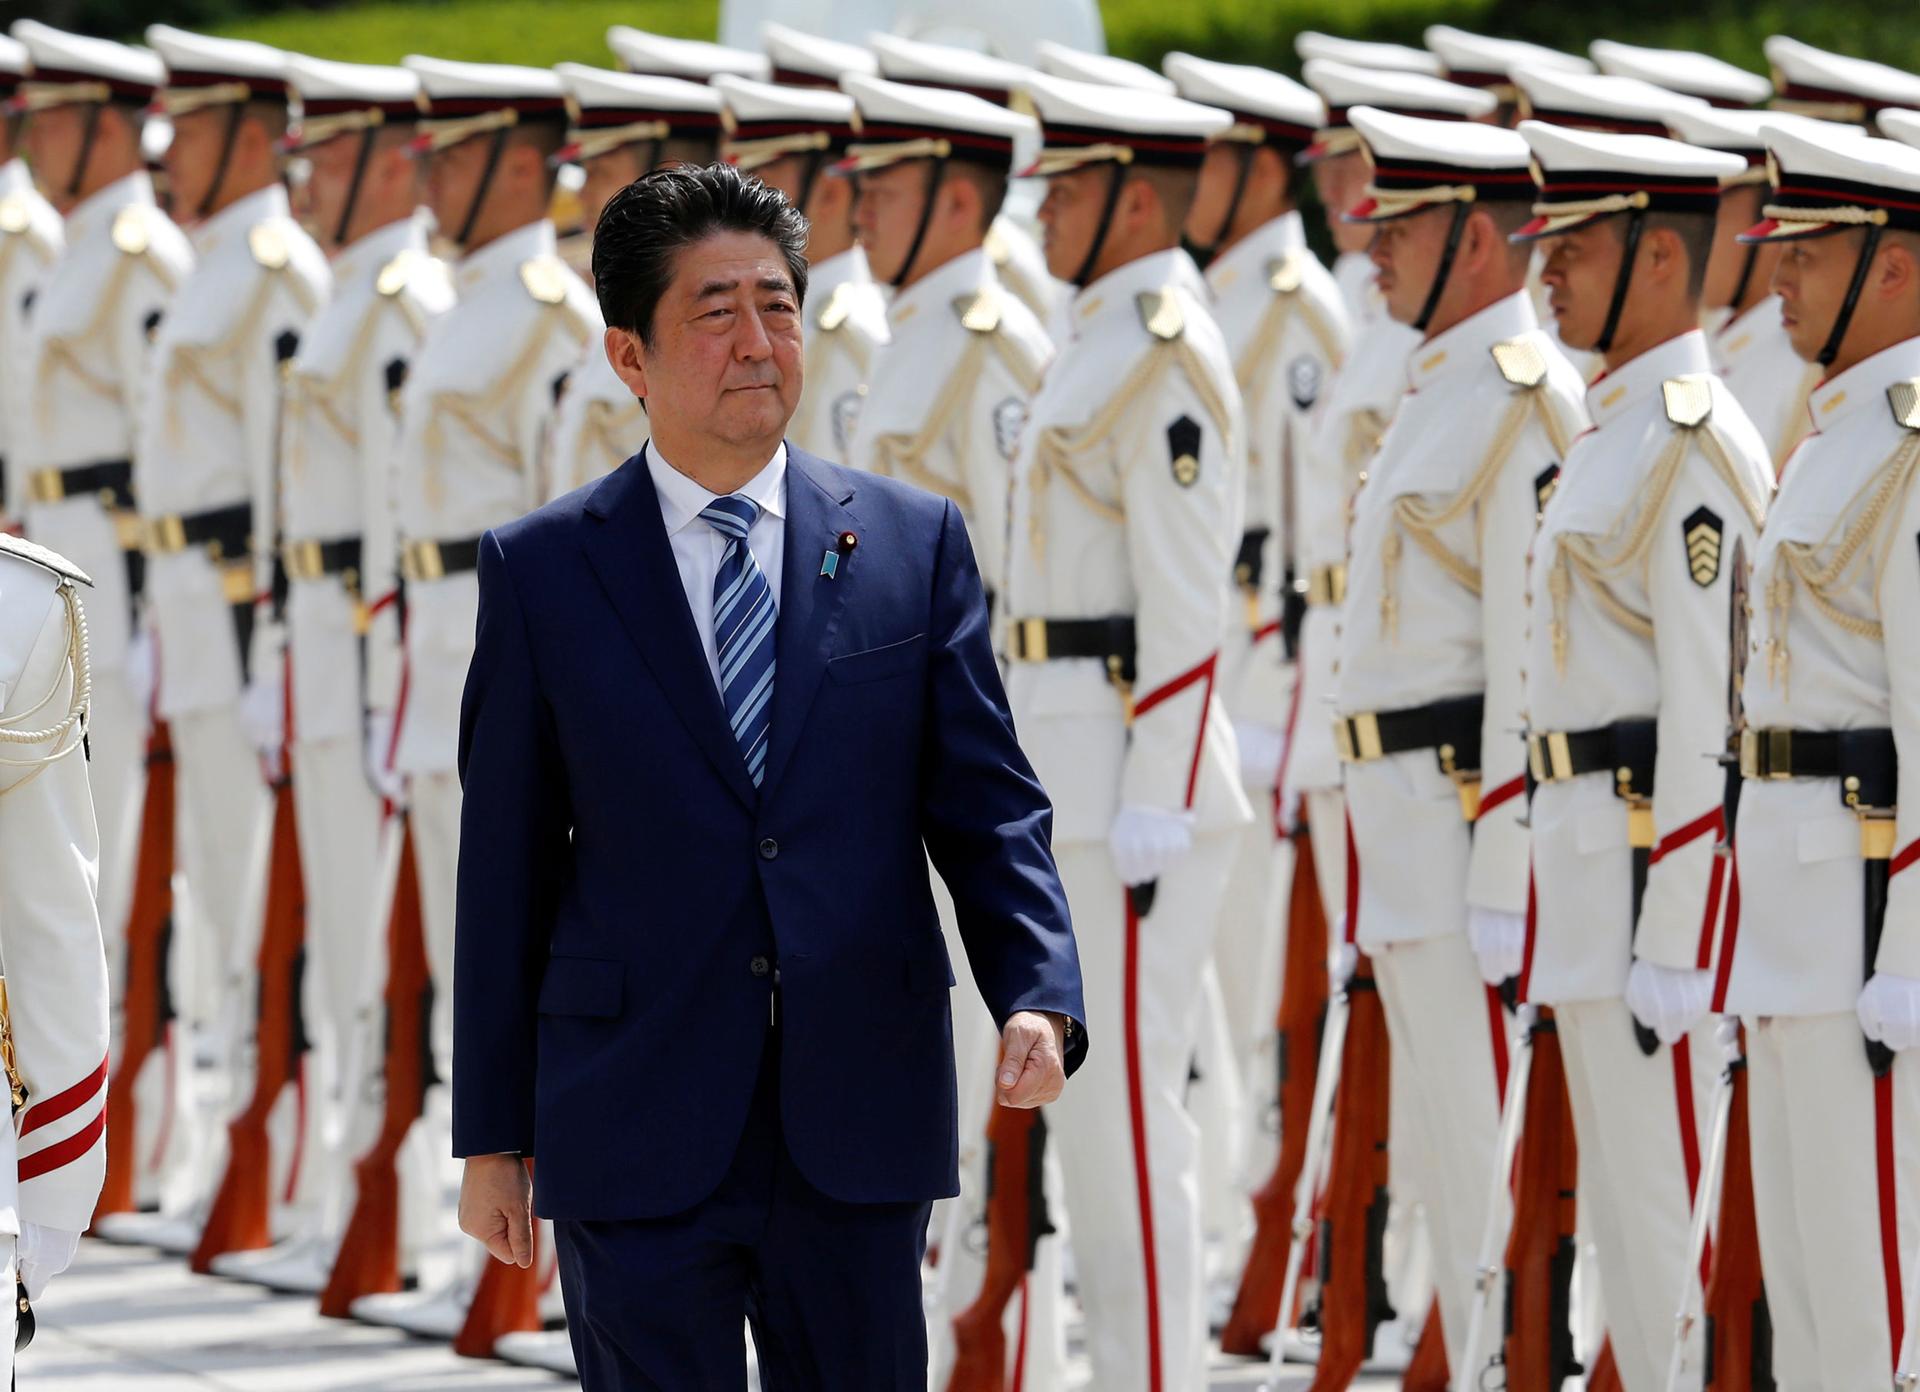 Prime Minister Shinzō Abe walks along a line of soldiers in white dress uniforms.